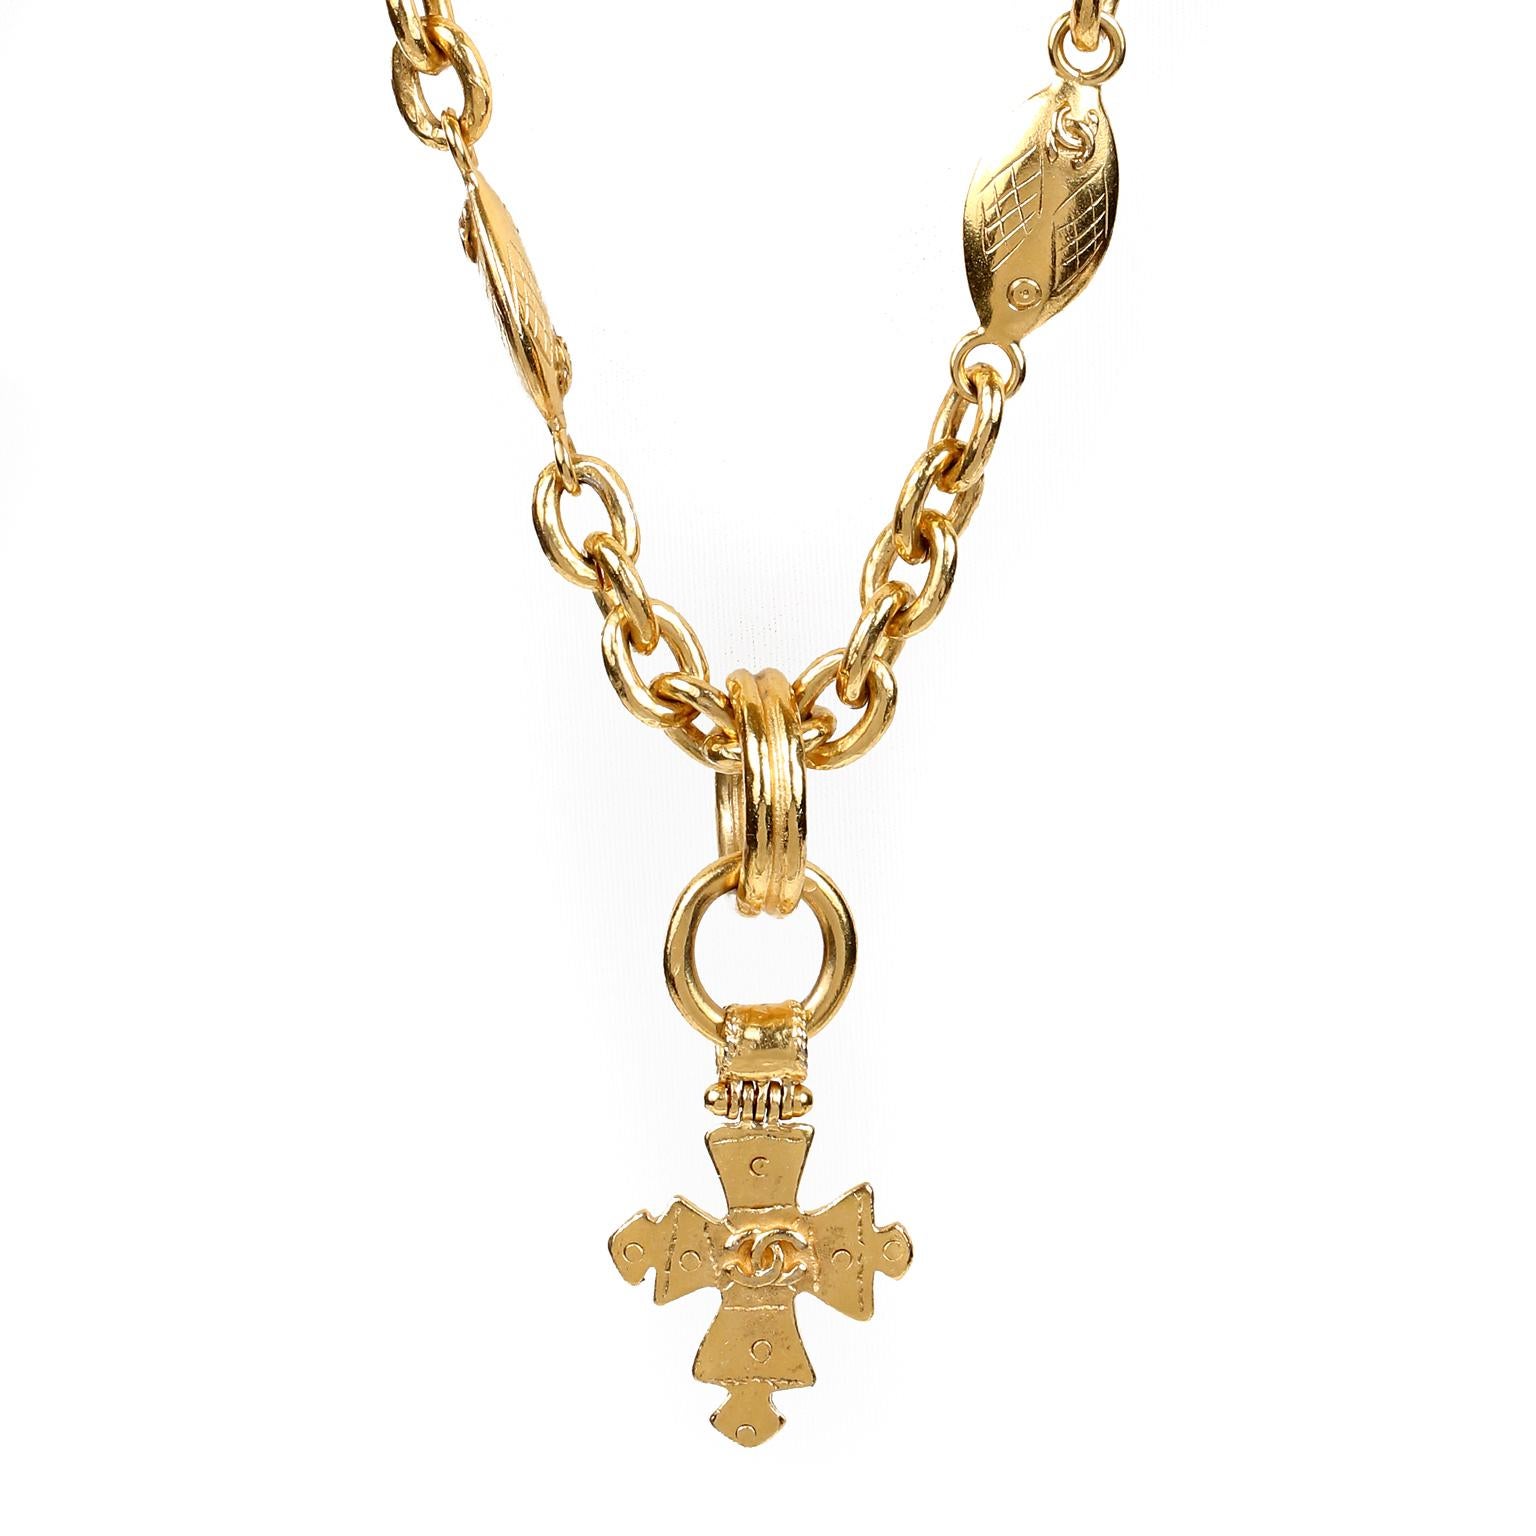 This authentic Chanel Gold CC Cross Necklace is in excellent vintage condition.  Interlocking CC adorned gold tone cross dangles from a long ornate chain.  Chain measures approximately 36 inches, pendant 2 inches.  Pouch or box included.

